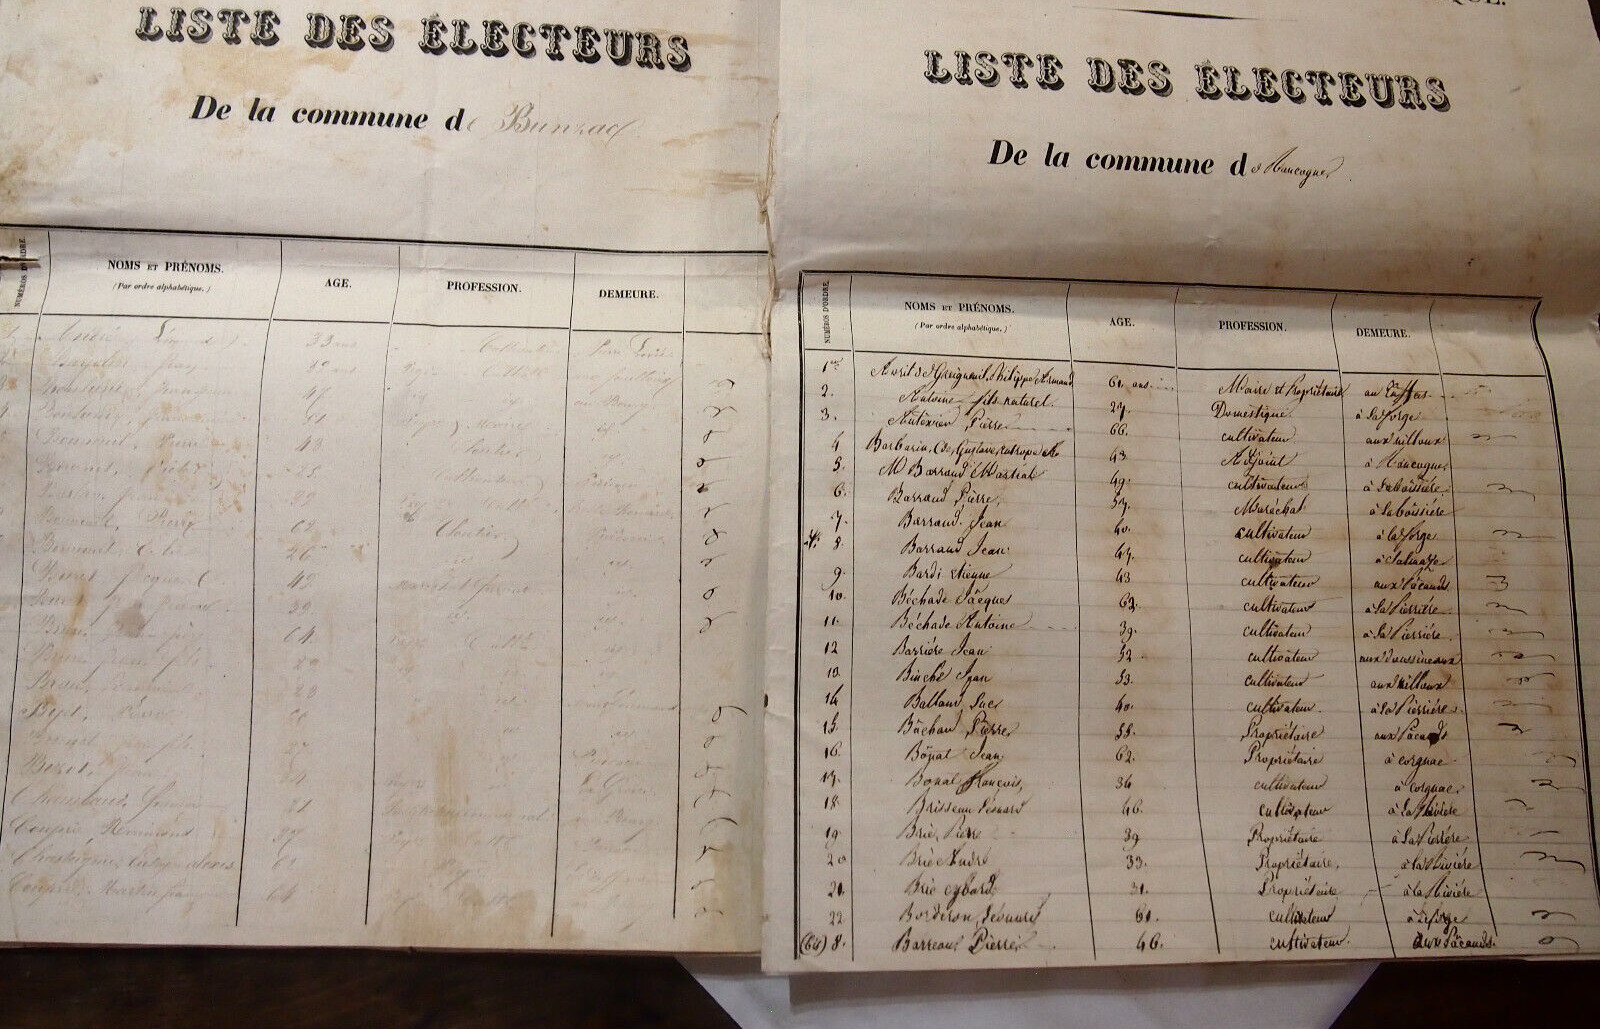 ELECTION OF 1848 list of common electors of BUNZAC and RANCOGNE charente